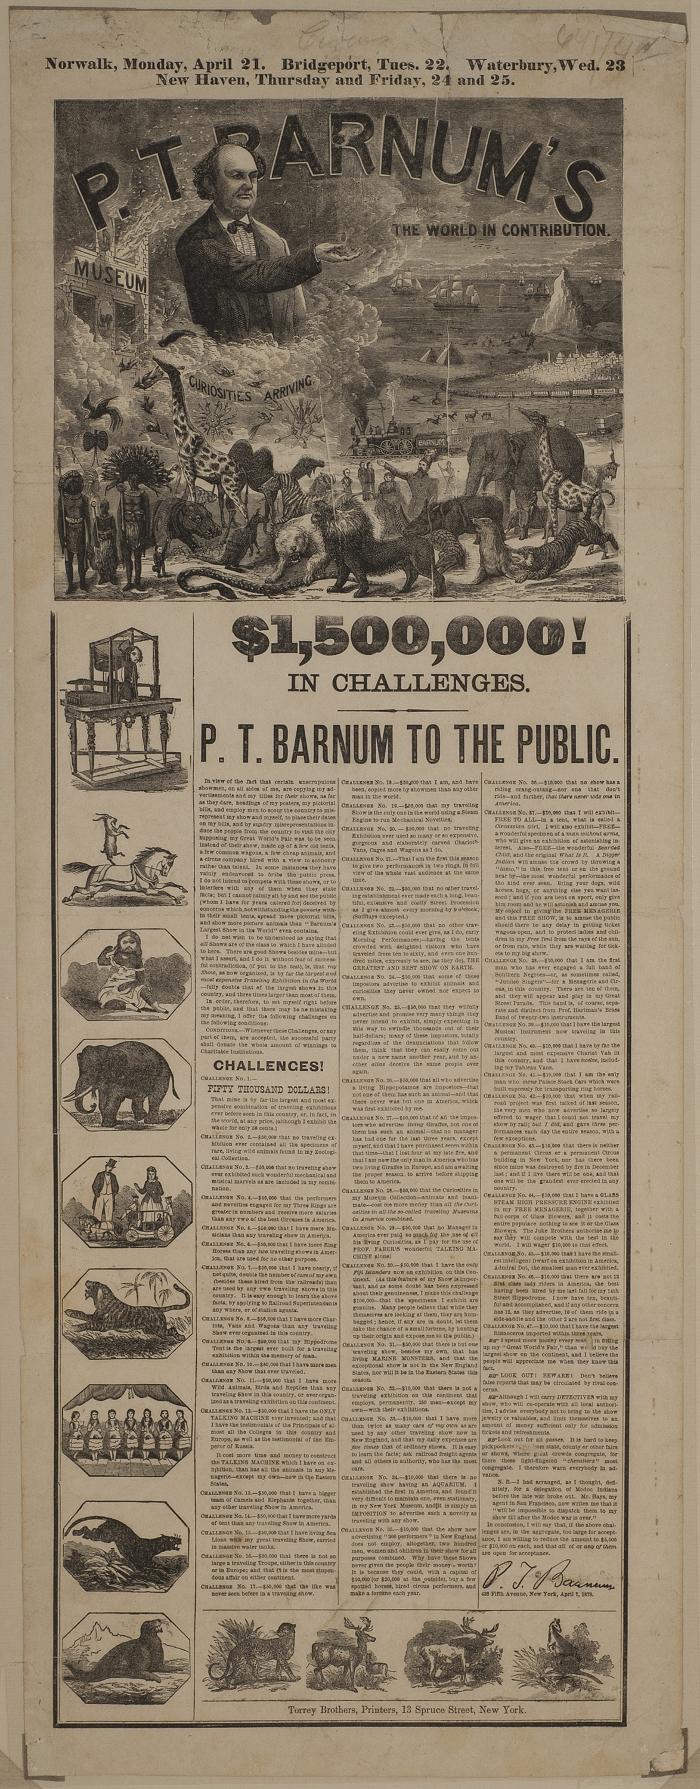 Advertisement: Broadside "'$1,500,000! in Challenges' - P.T. Barnum to the Public"